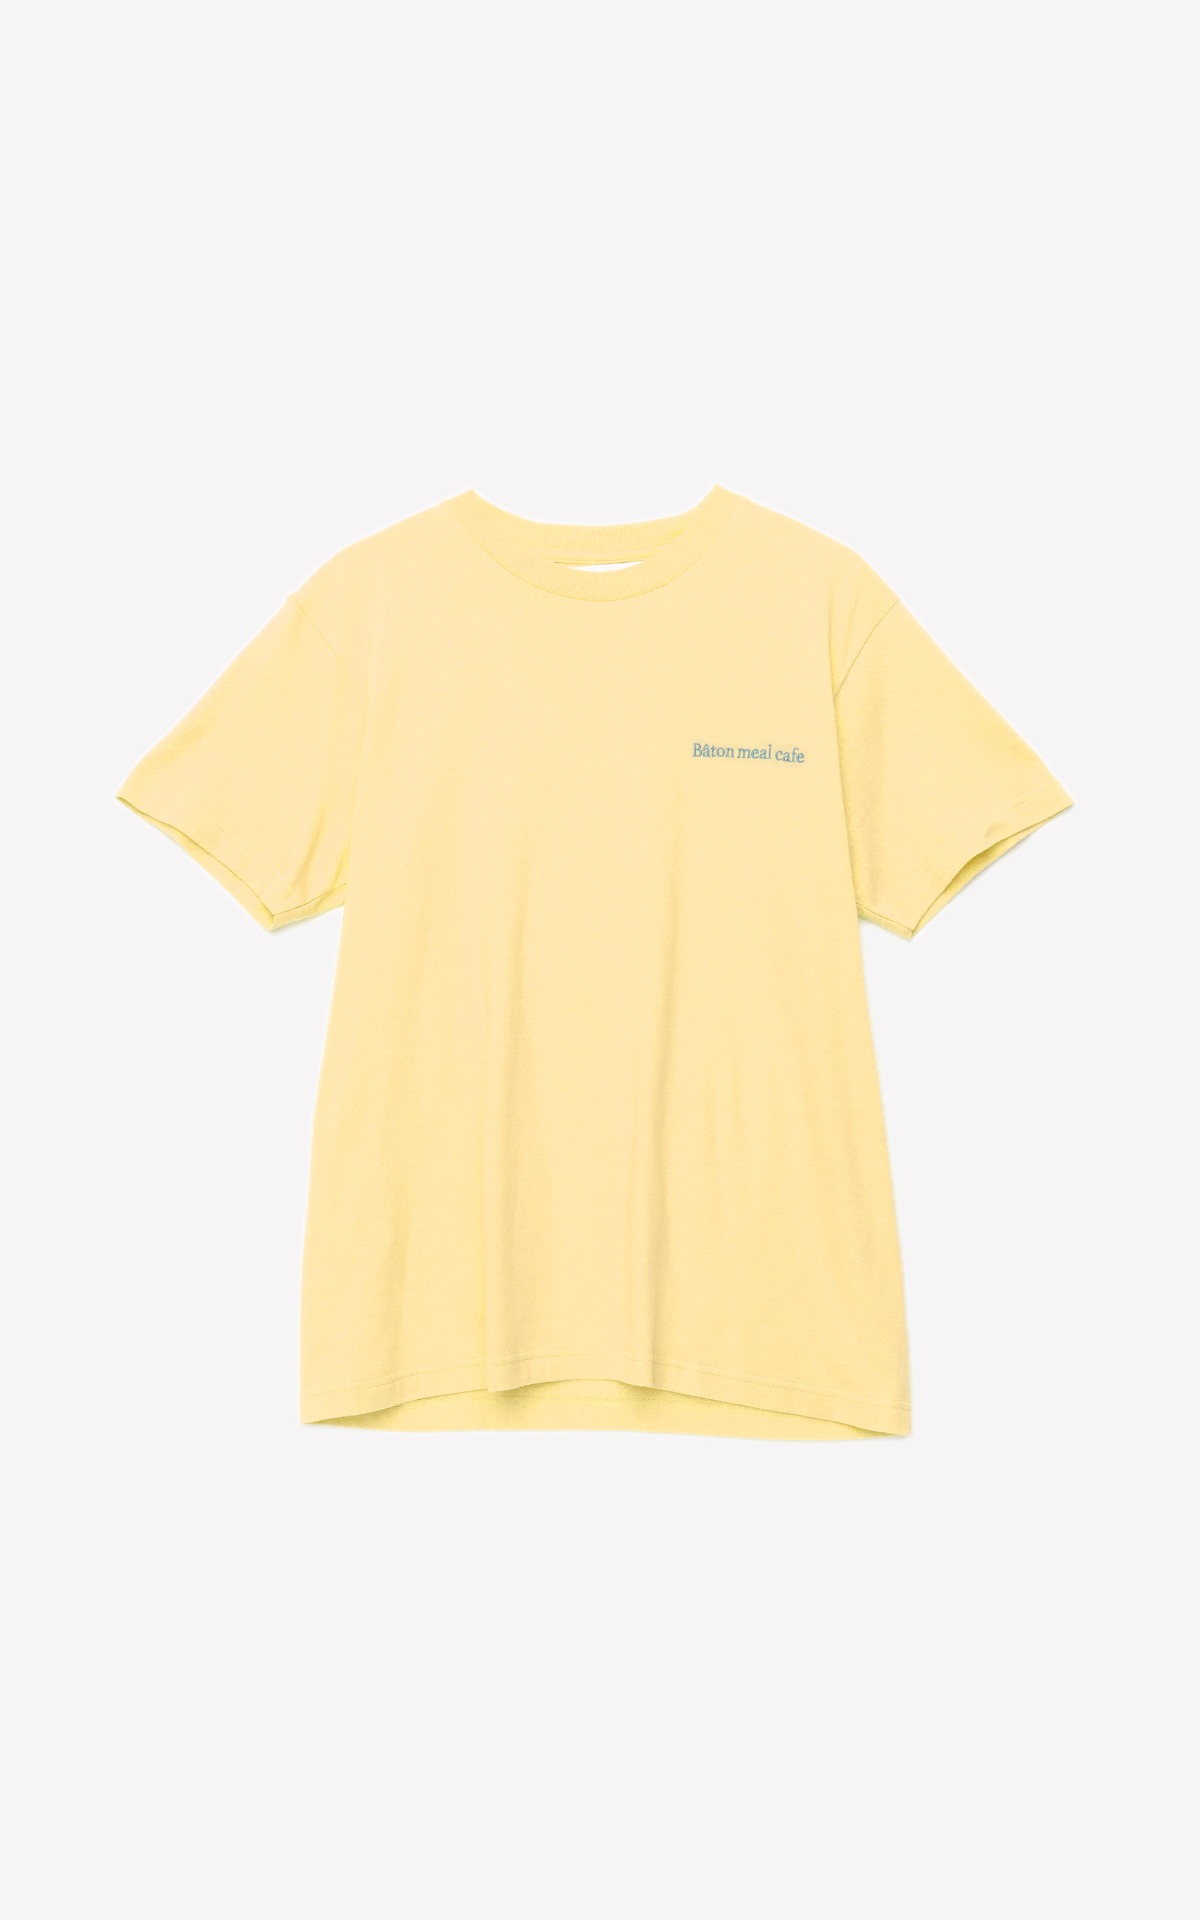 HEARTY MEAL T-SHIRT_YELLOW